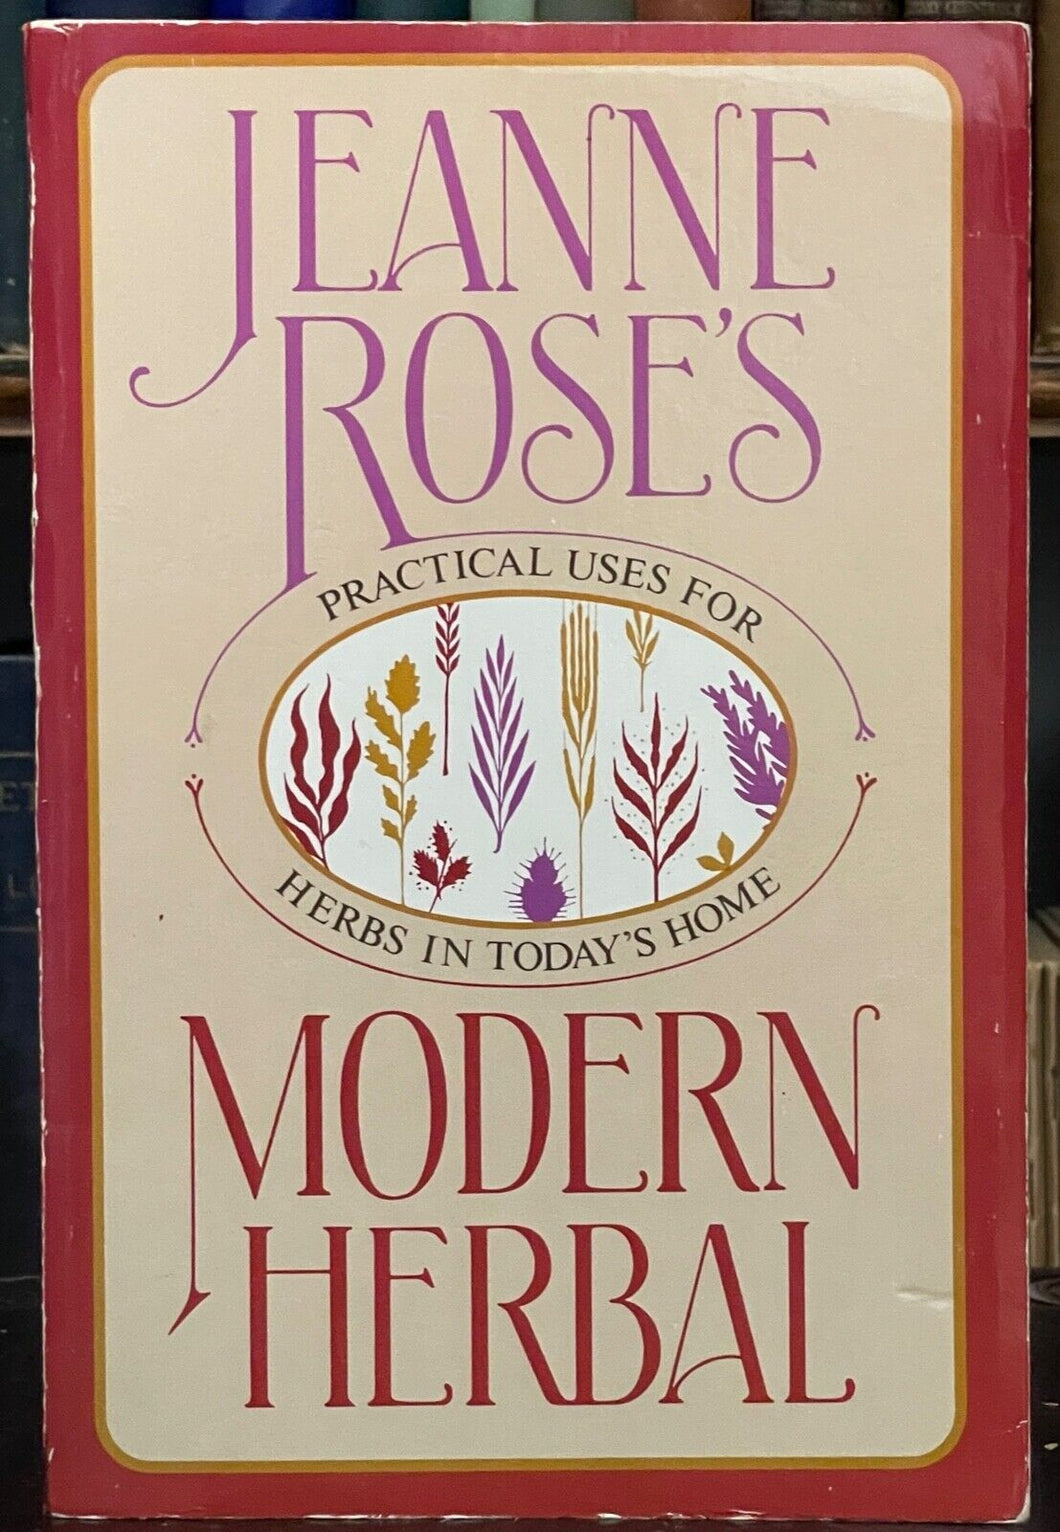 JEANNE ROSE'S MODERN HERBAL - 1987 - HOMEOPATHY, AROMATHERAPY, REMEDIES - SIGNED